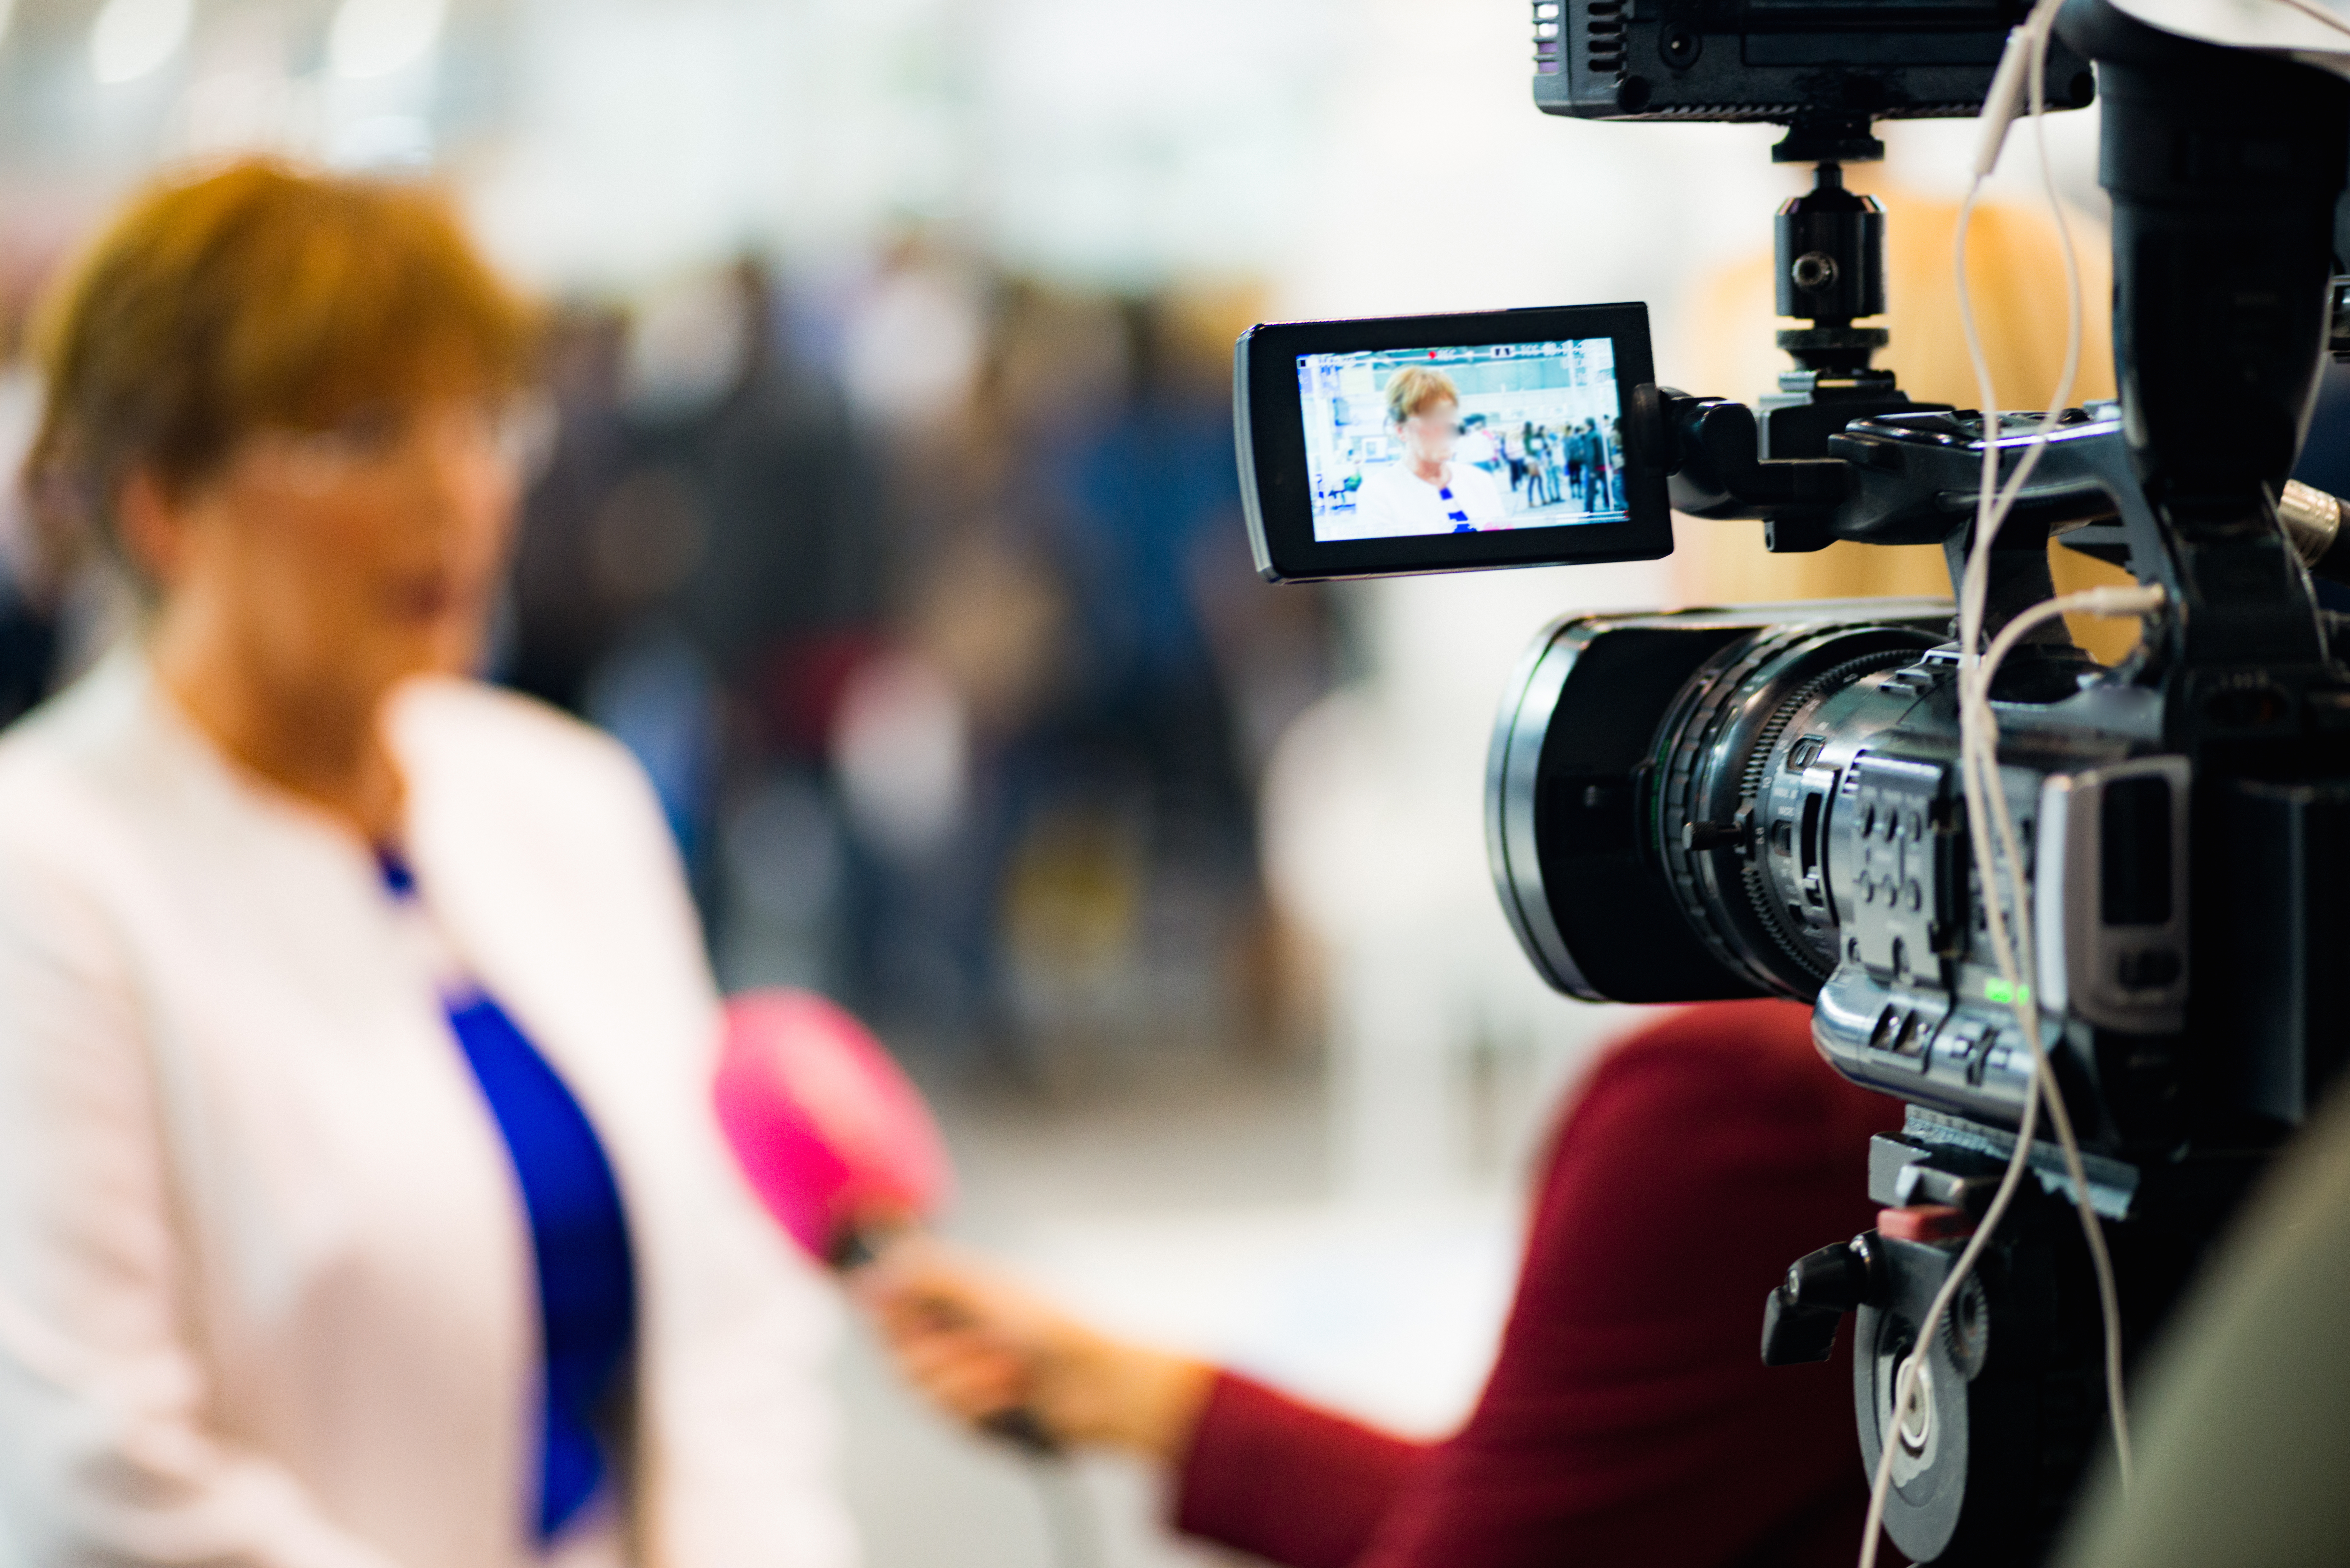 Woman being interviewed on camera